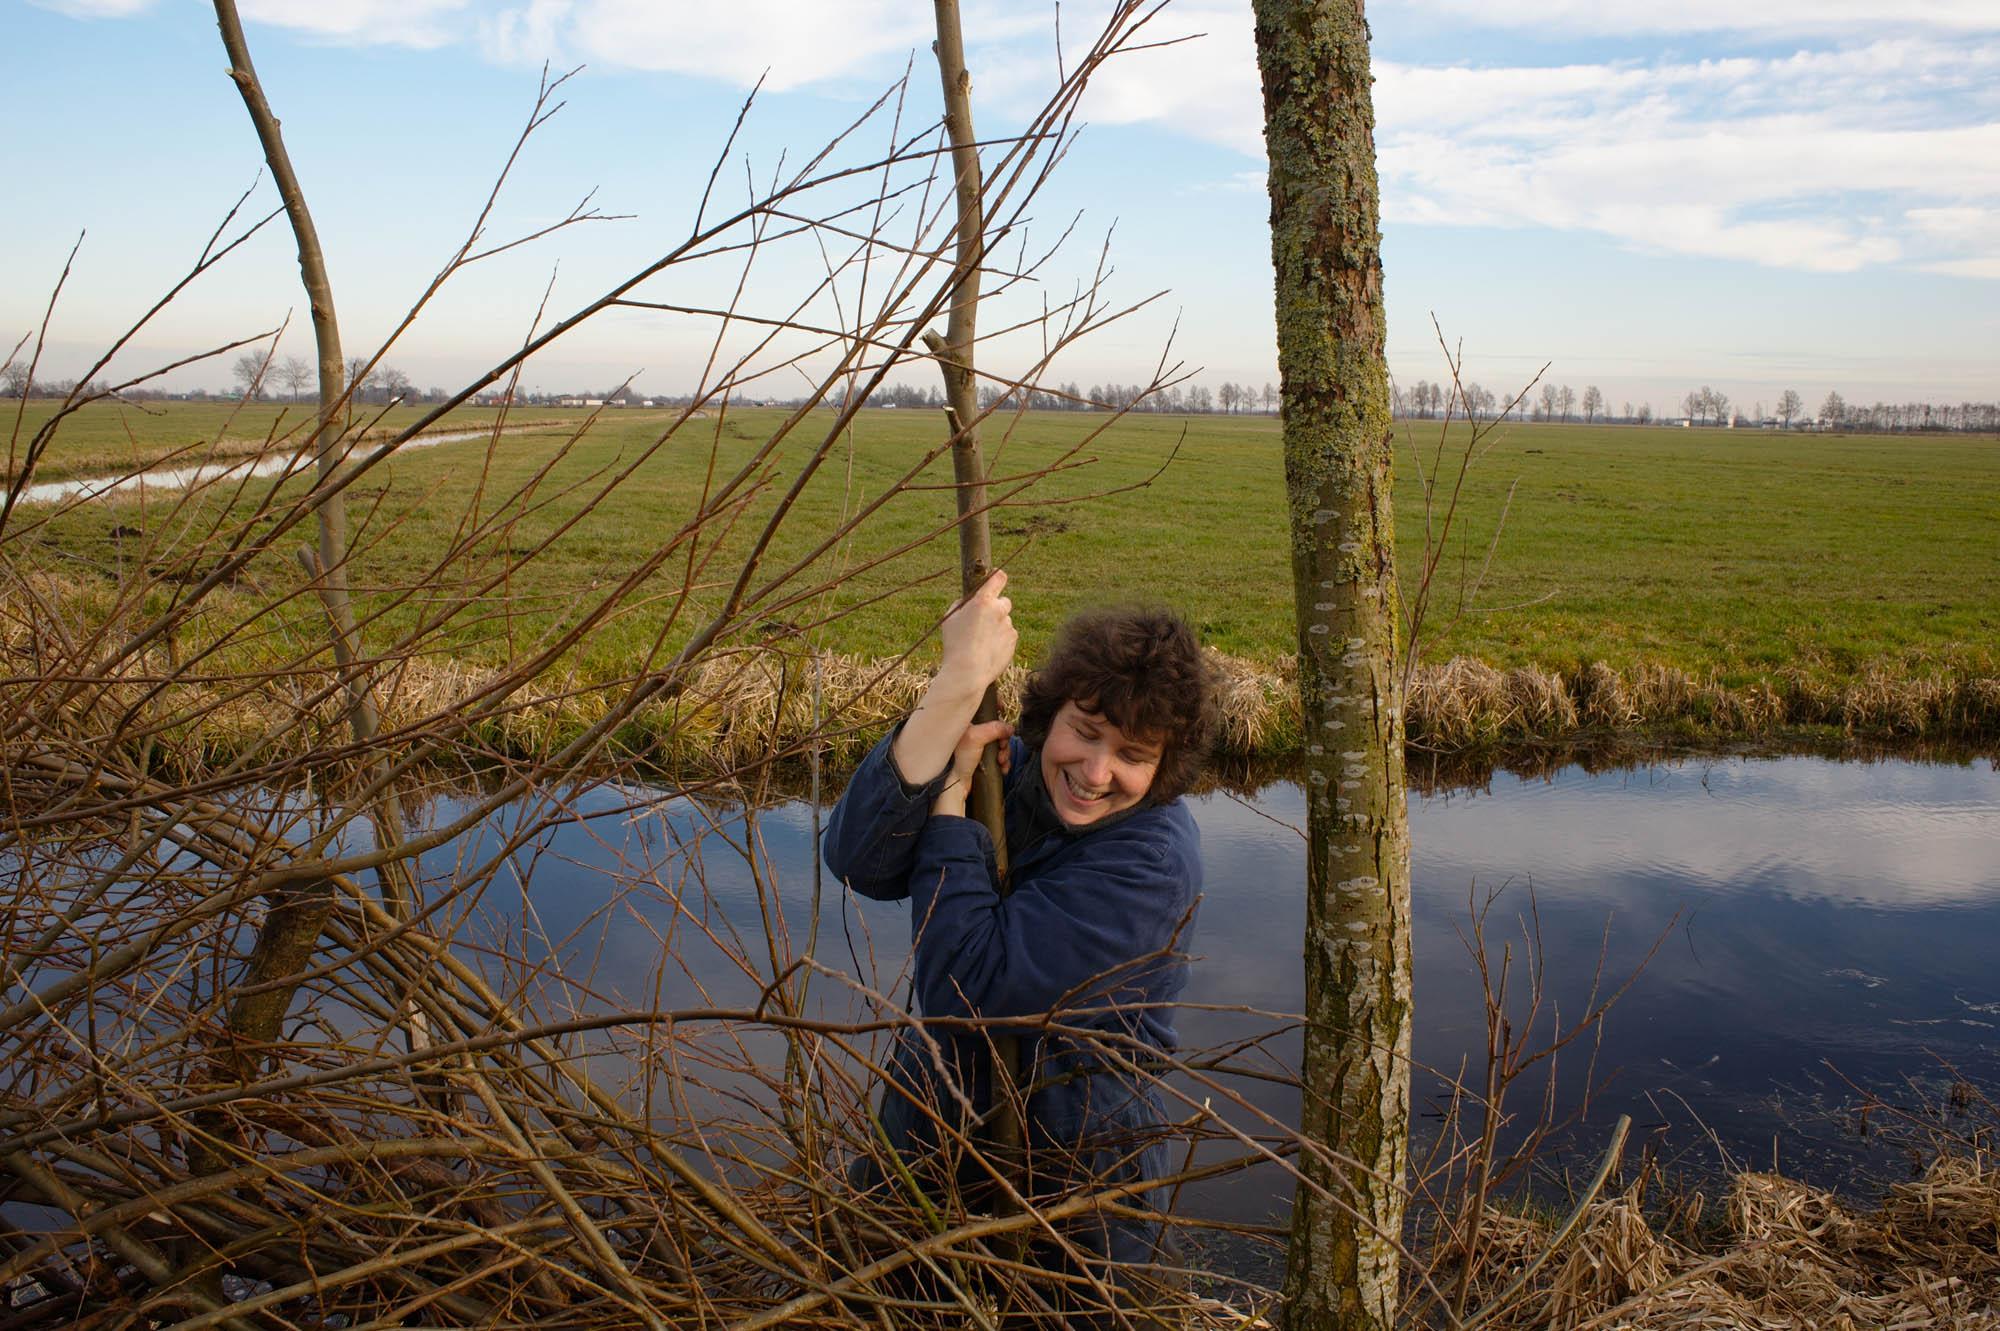 The Other Farm - Monique is planting a pollard willow branch as part of a...